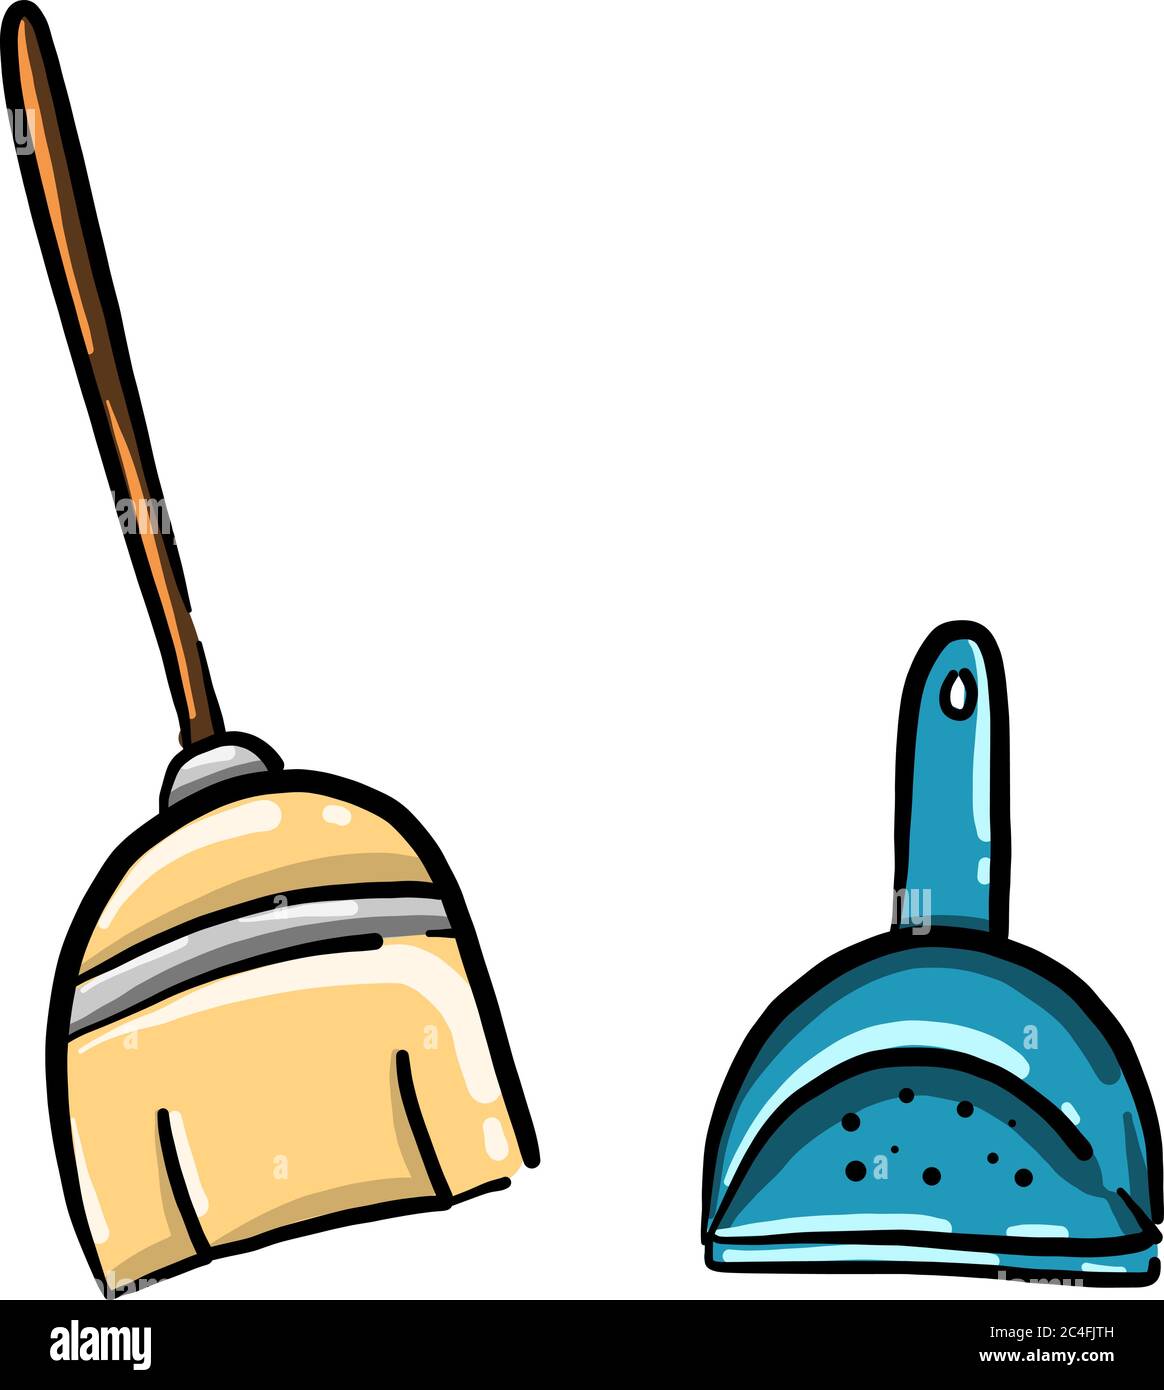 Broom and scoop, illustration, vector on white background Stock Vector